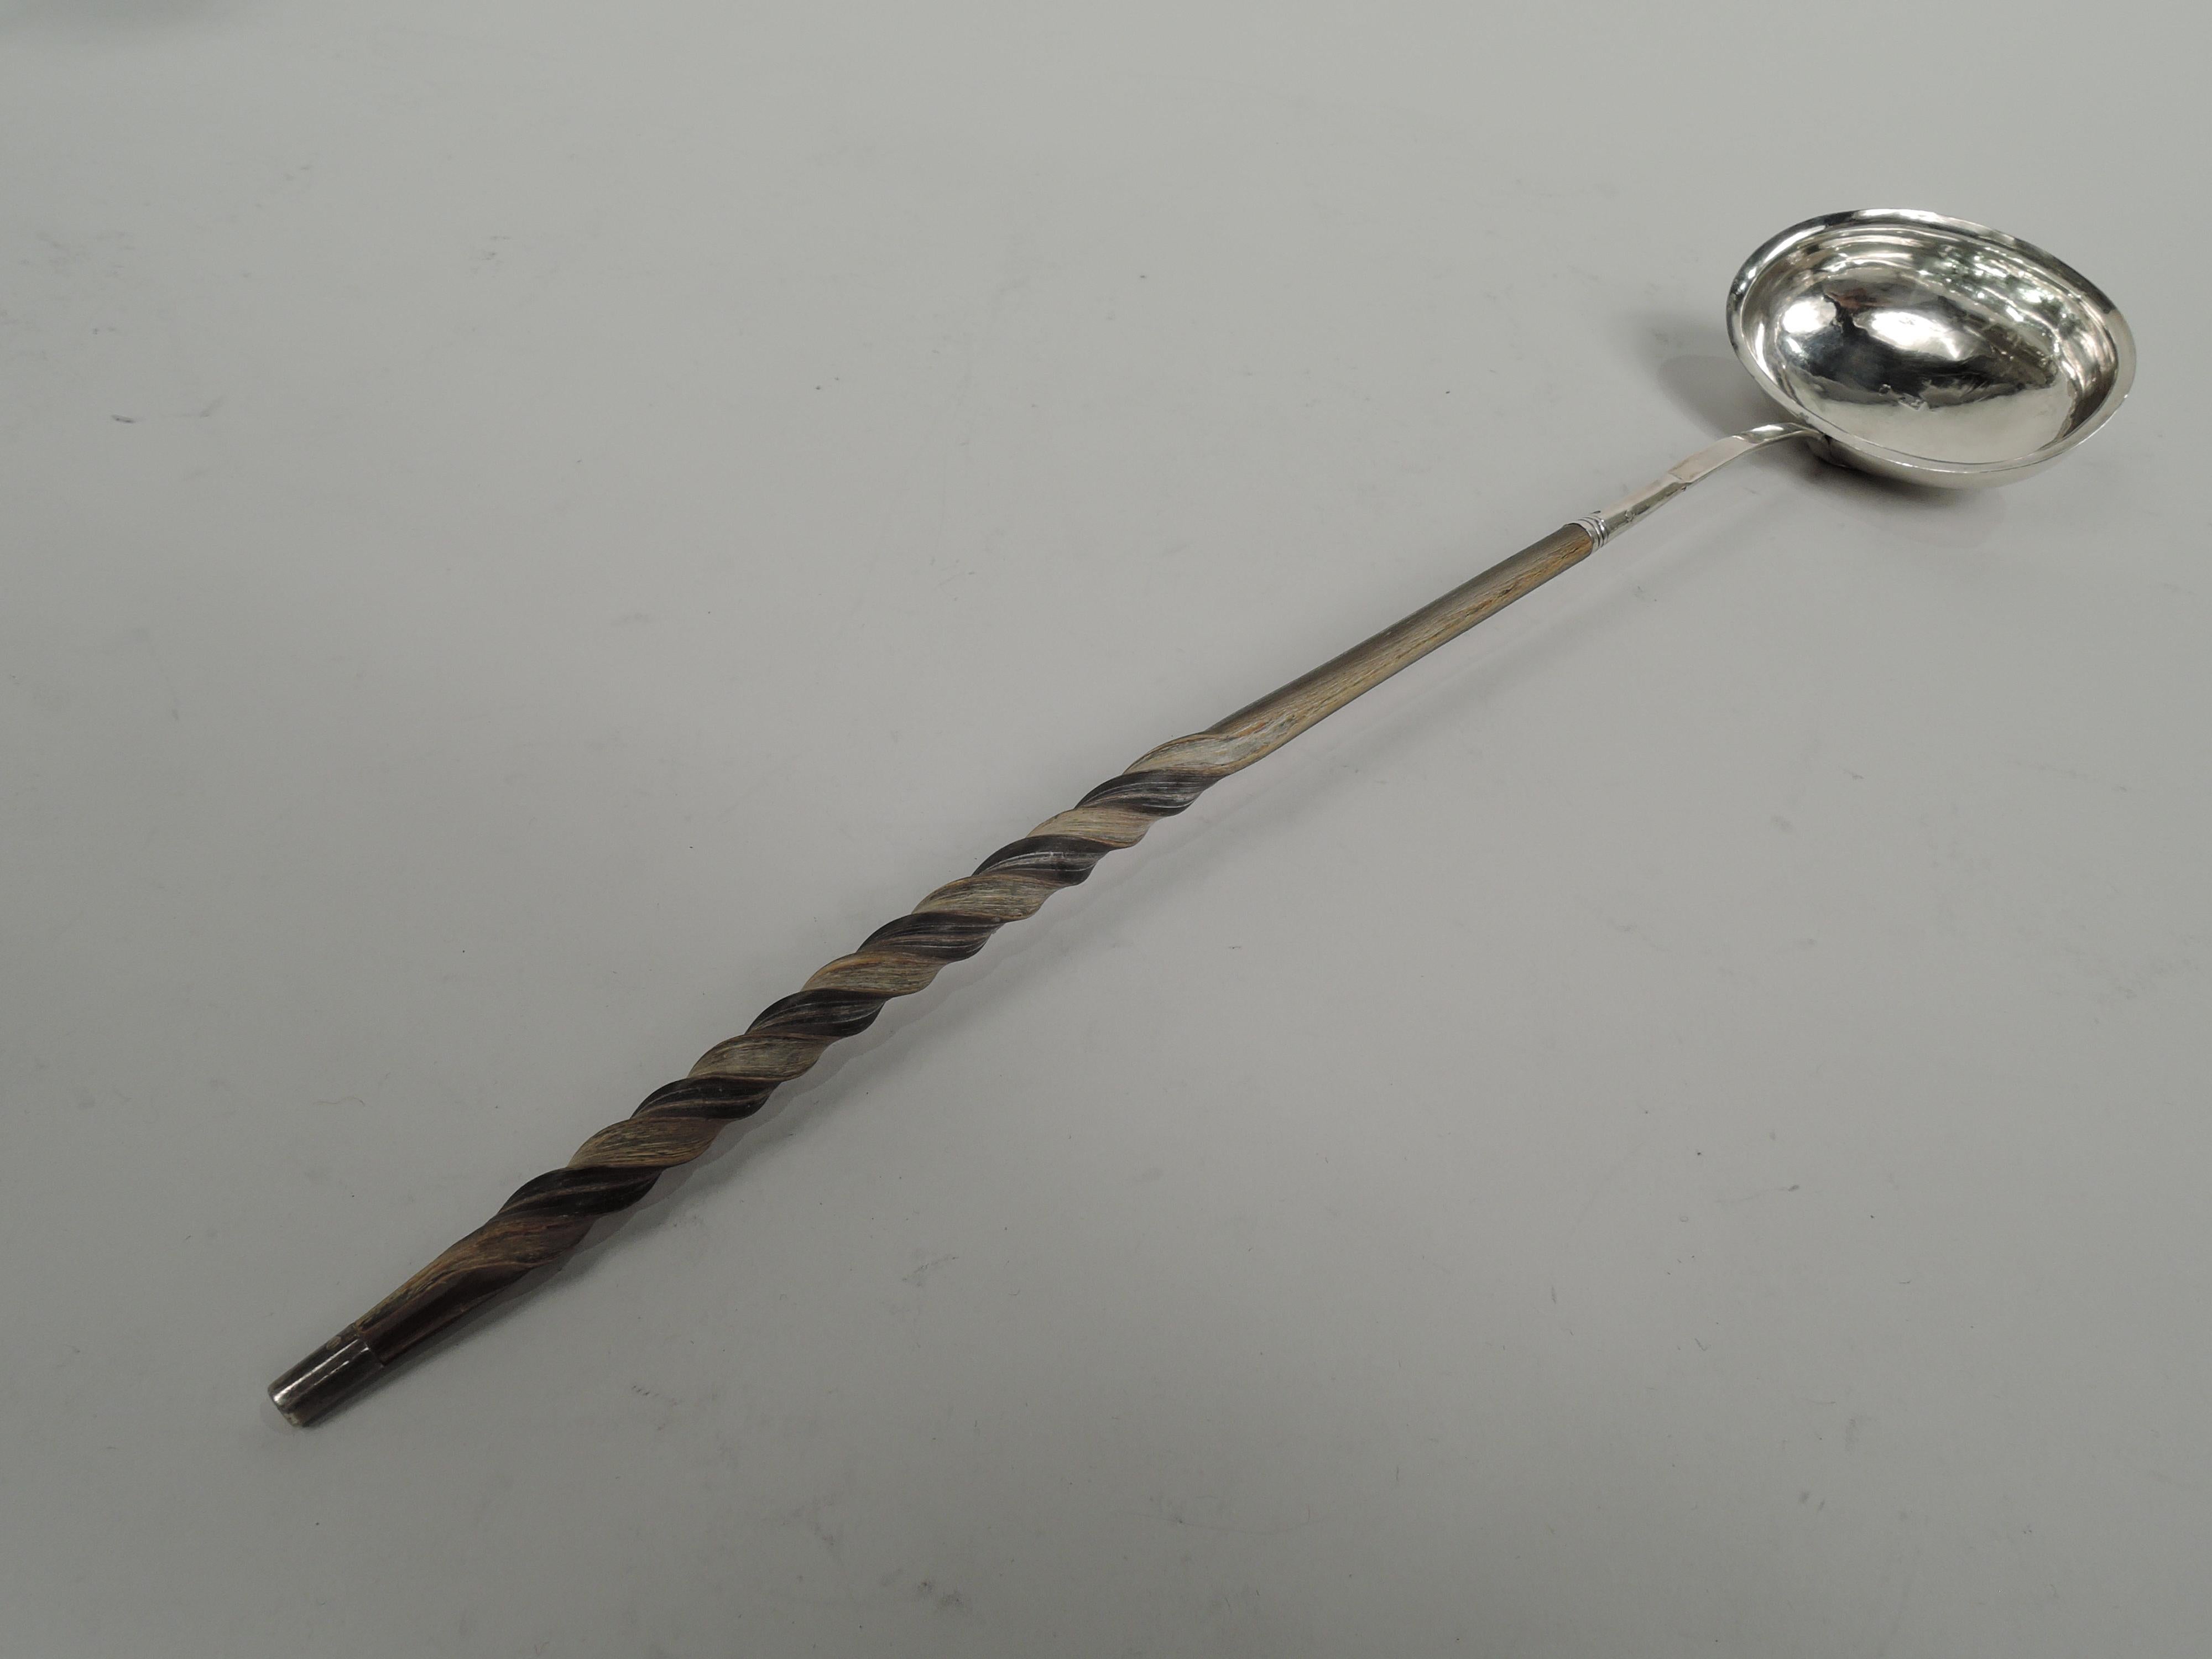 English Georgian sterling siler ladle with oval bowl; twisted baleen handle with sterling silver terminal. Worn marks including maker’s initials TM (possibly Thomas Mynd).